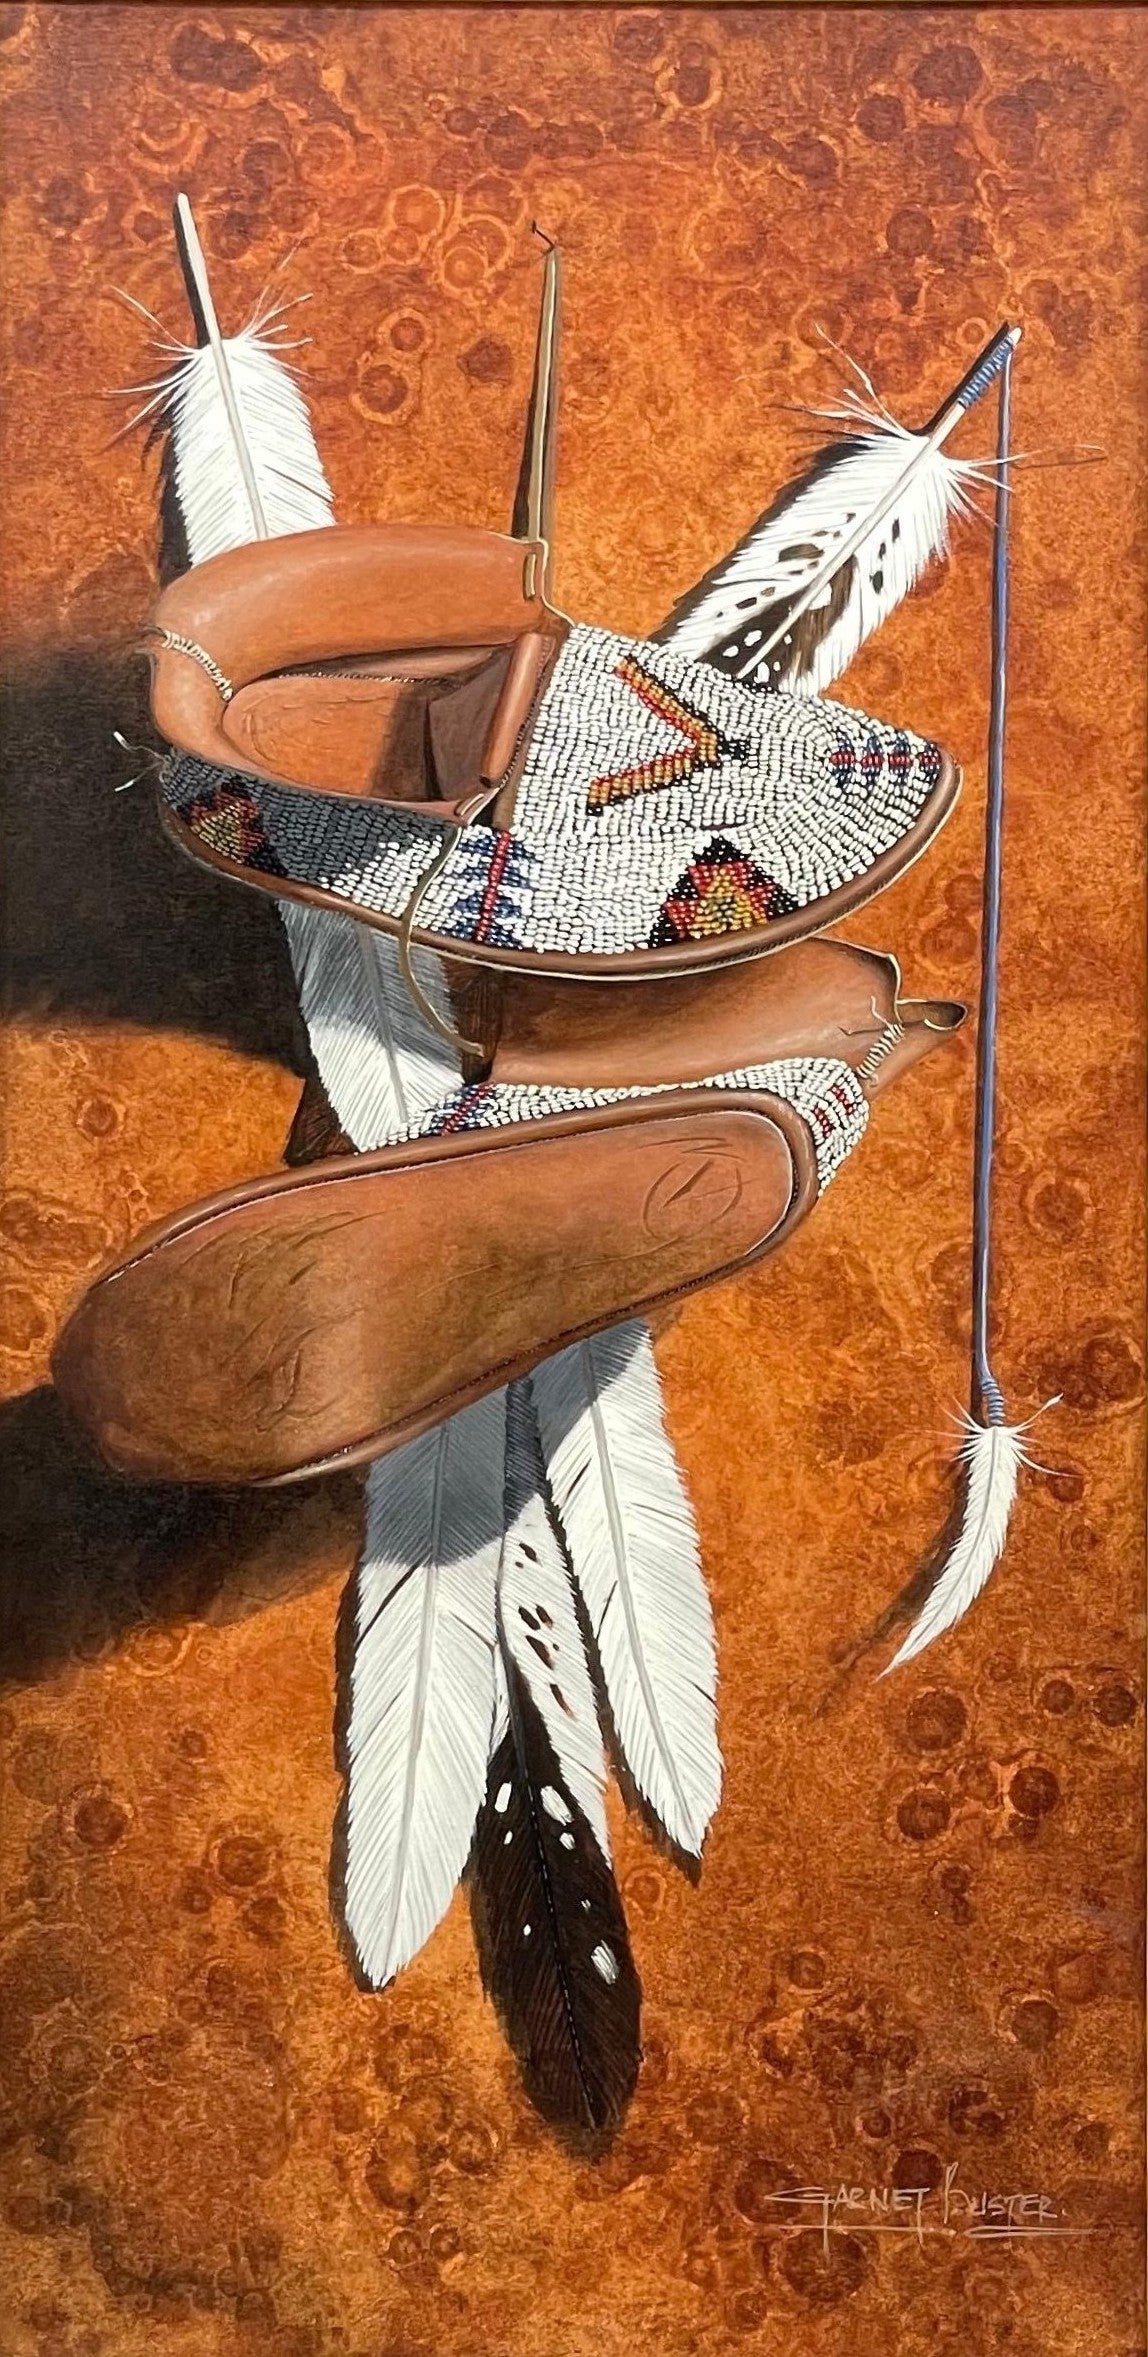 Buster Garnet - Moccasins and Feathers 30” x 15”